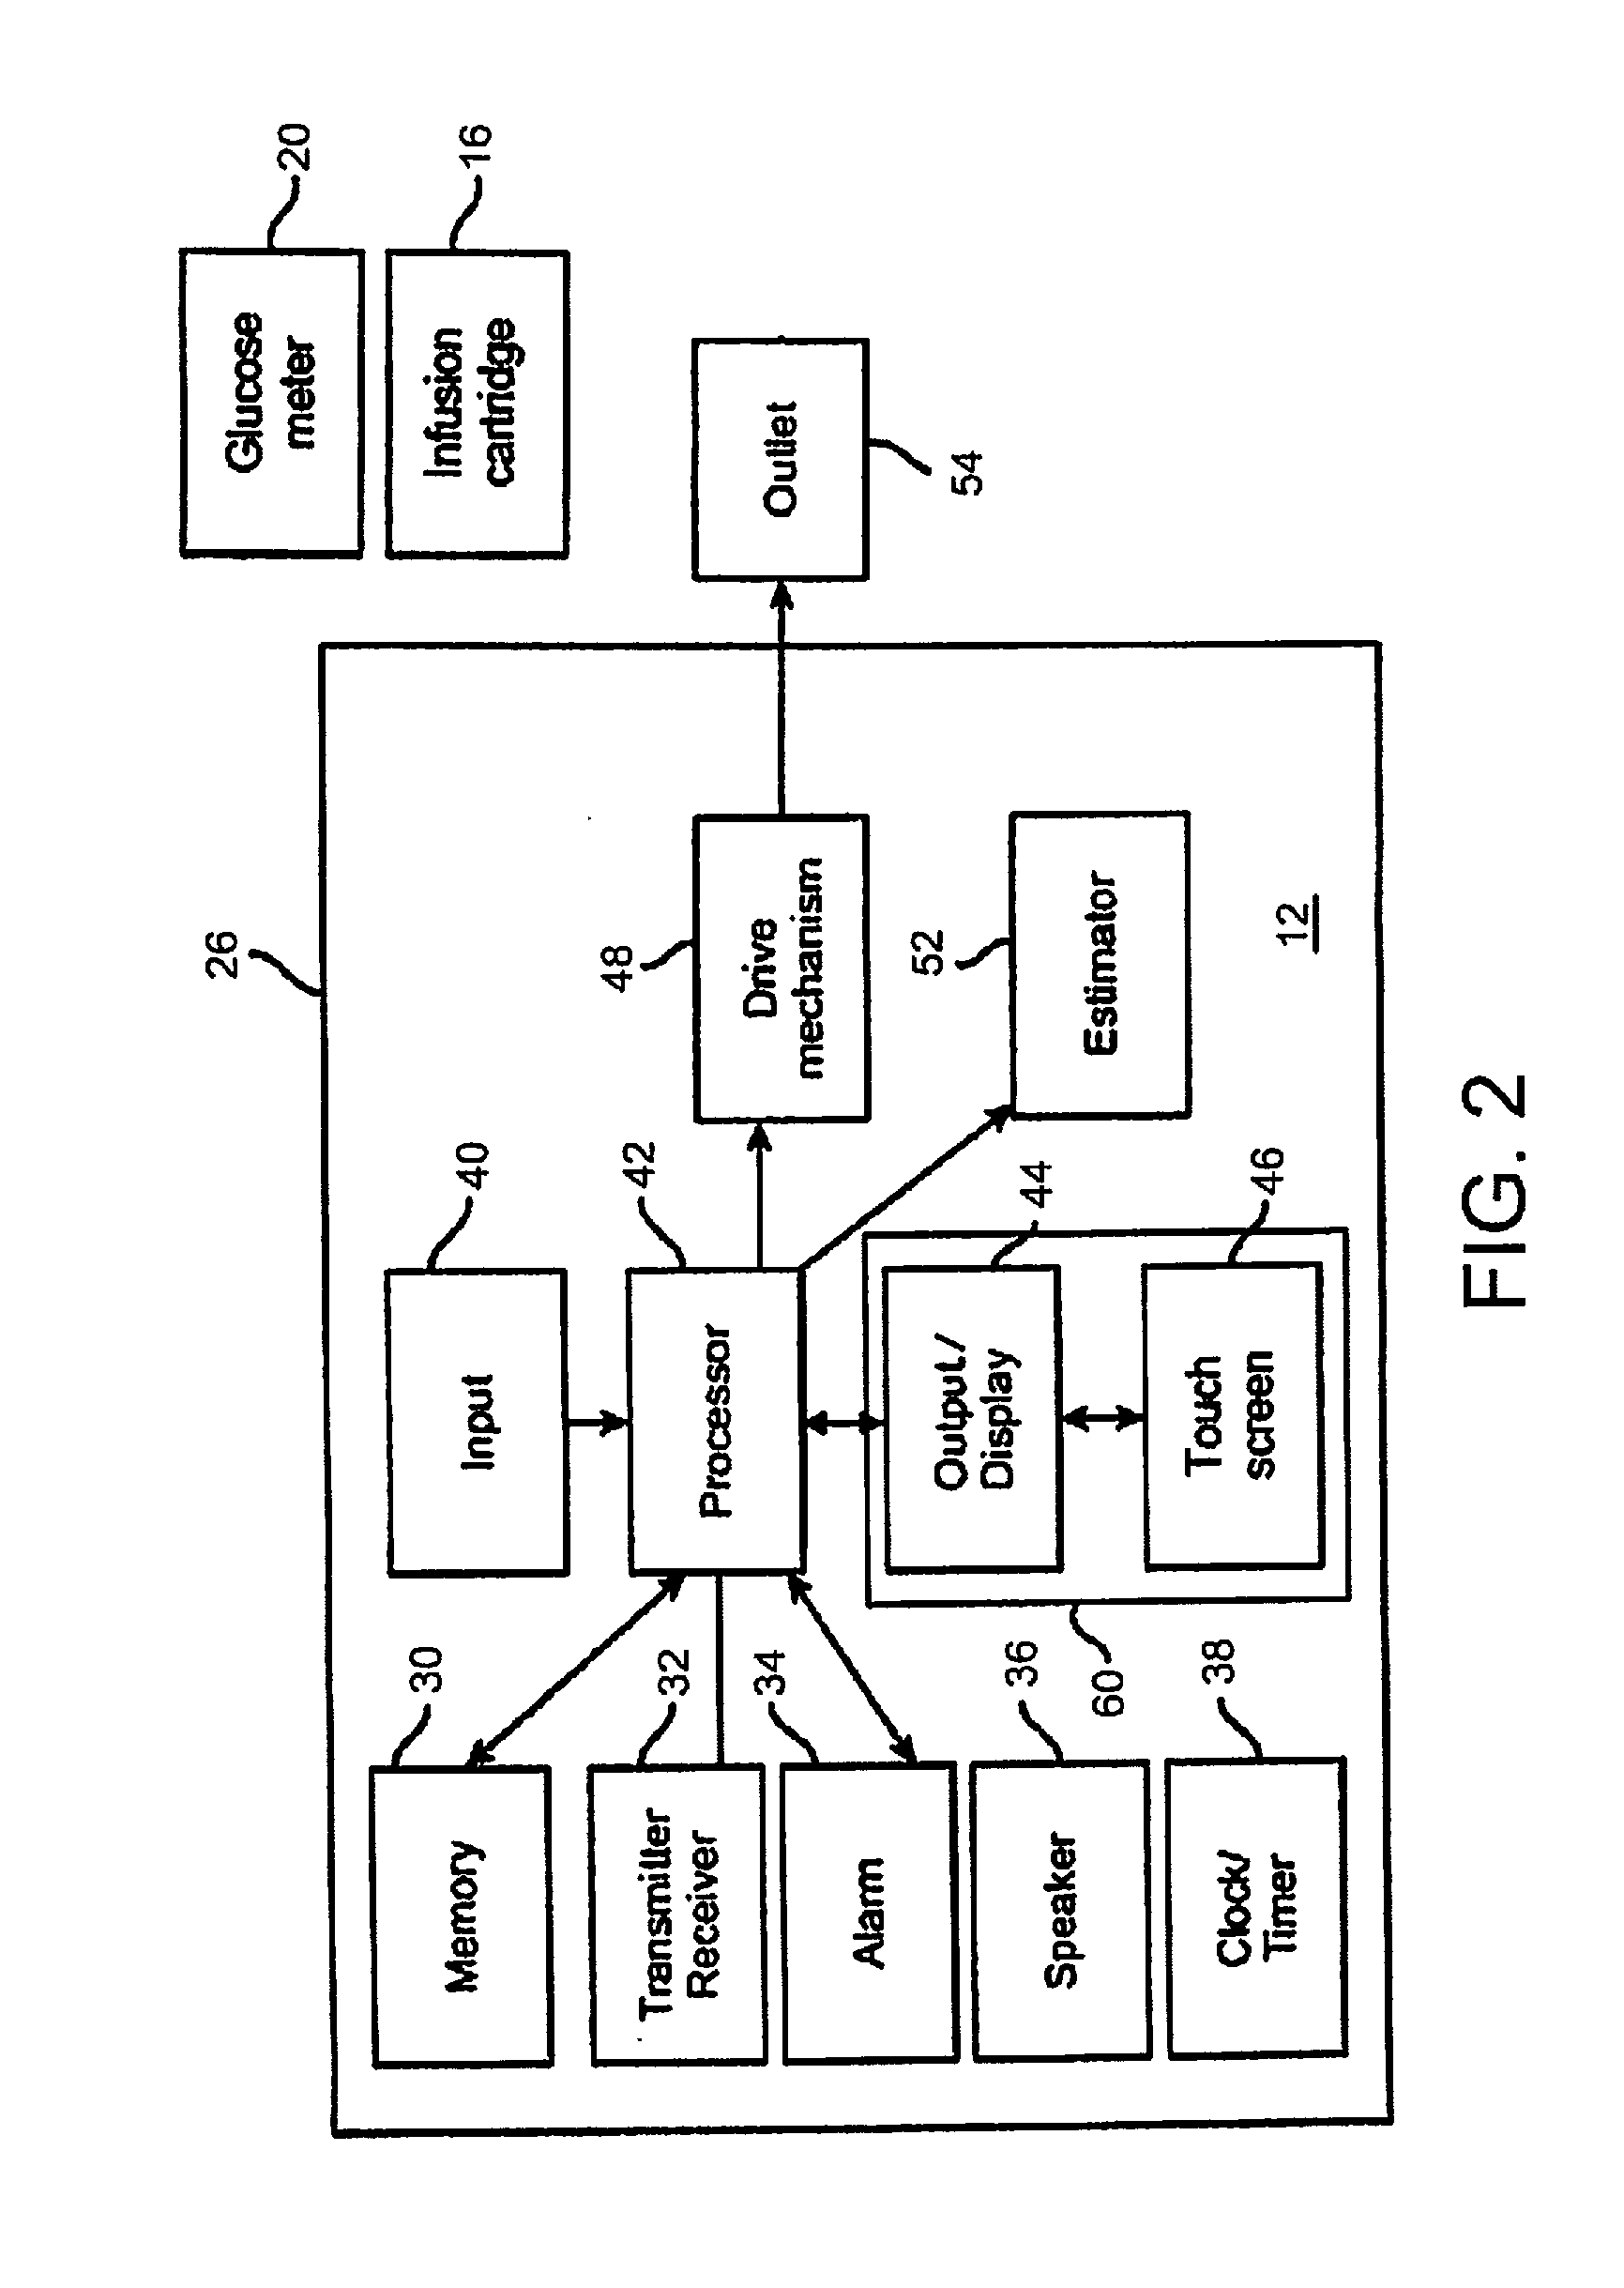 System and method for detecting and transmitting medical device alarm with a smartphone application